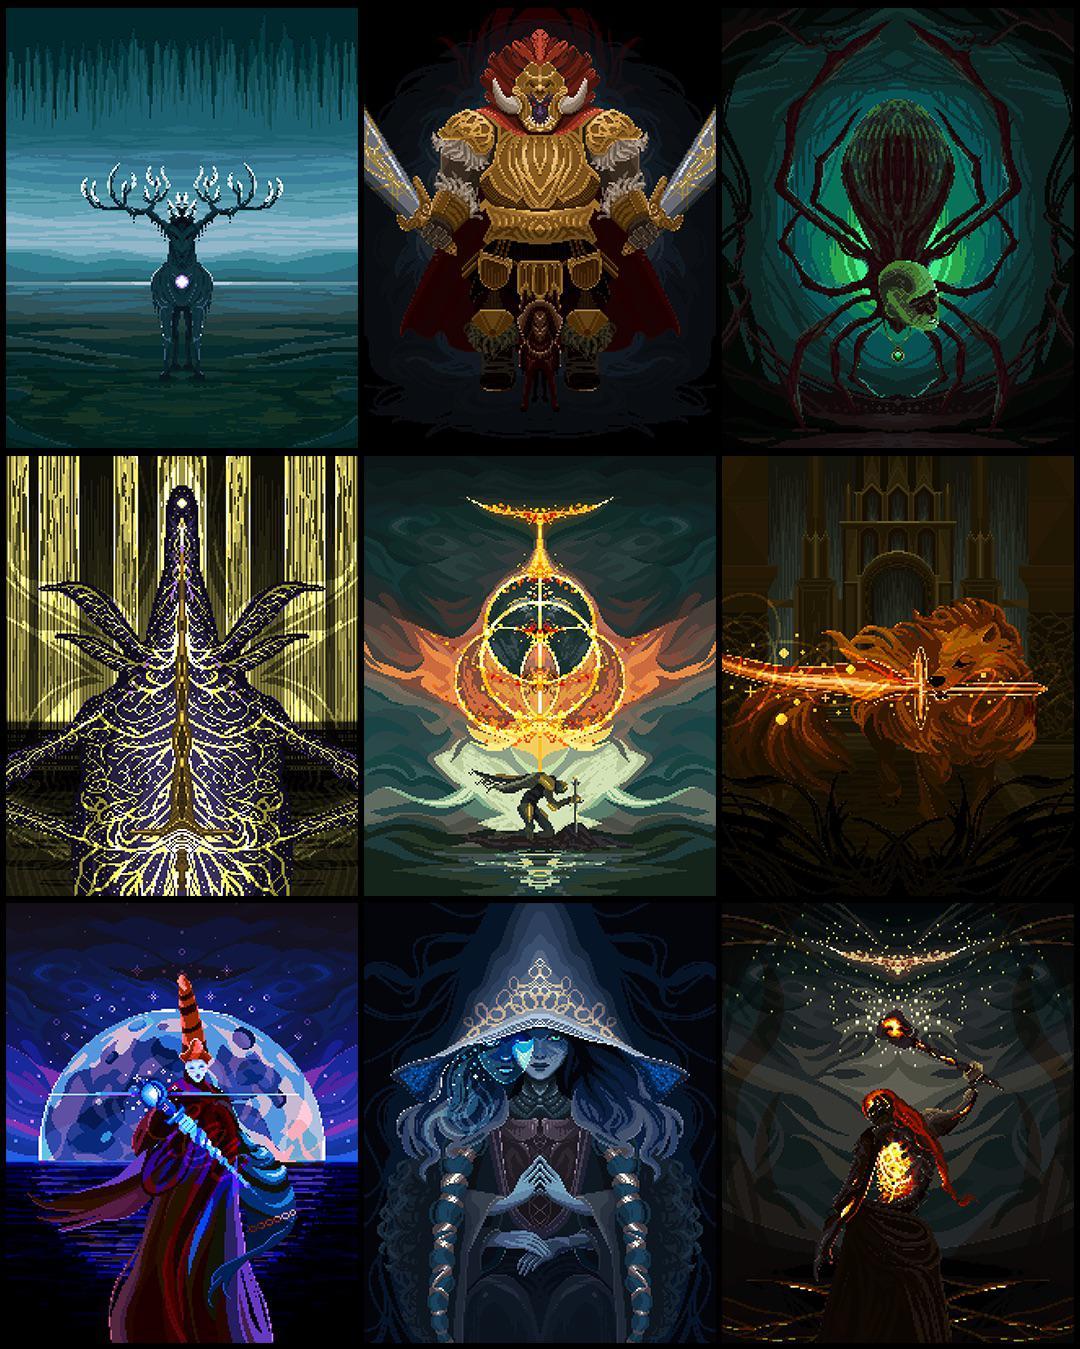 Elden Ring inspired artworks taught me so much about working with